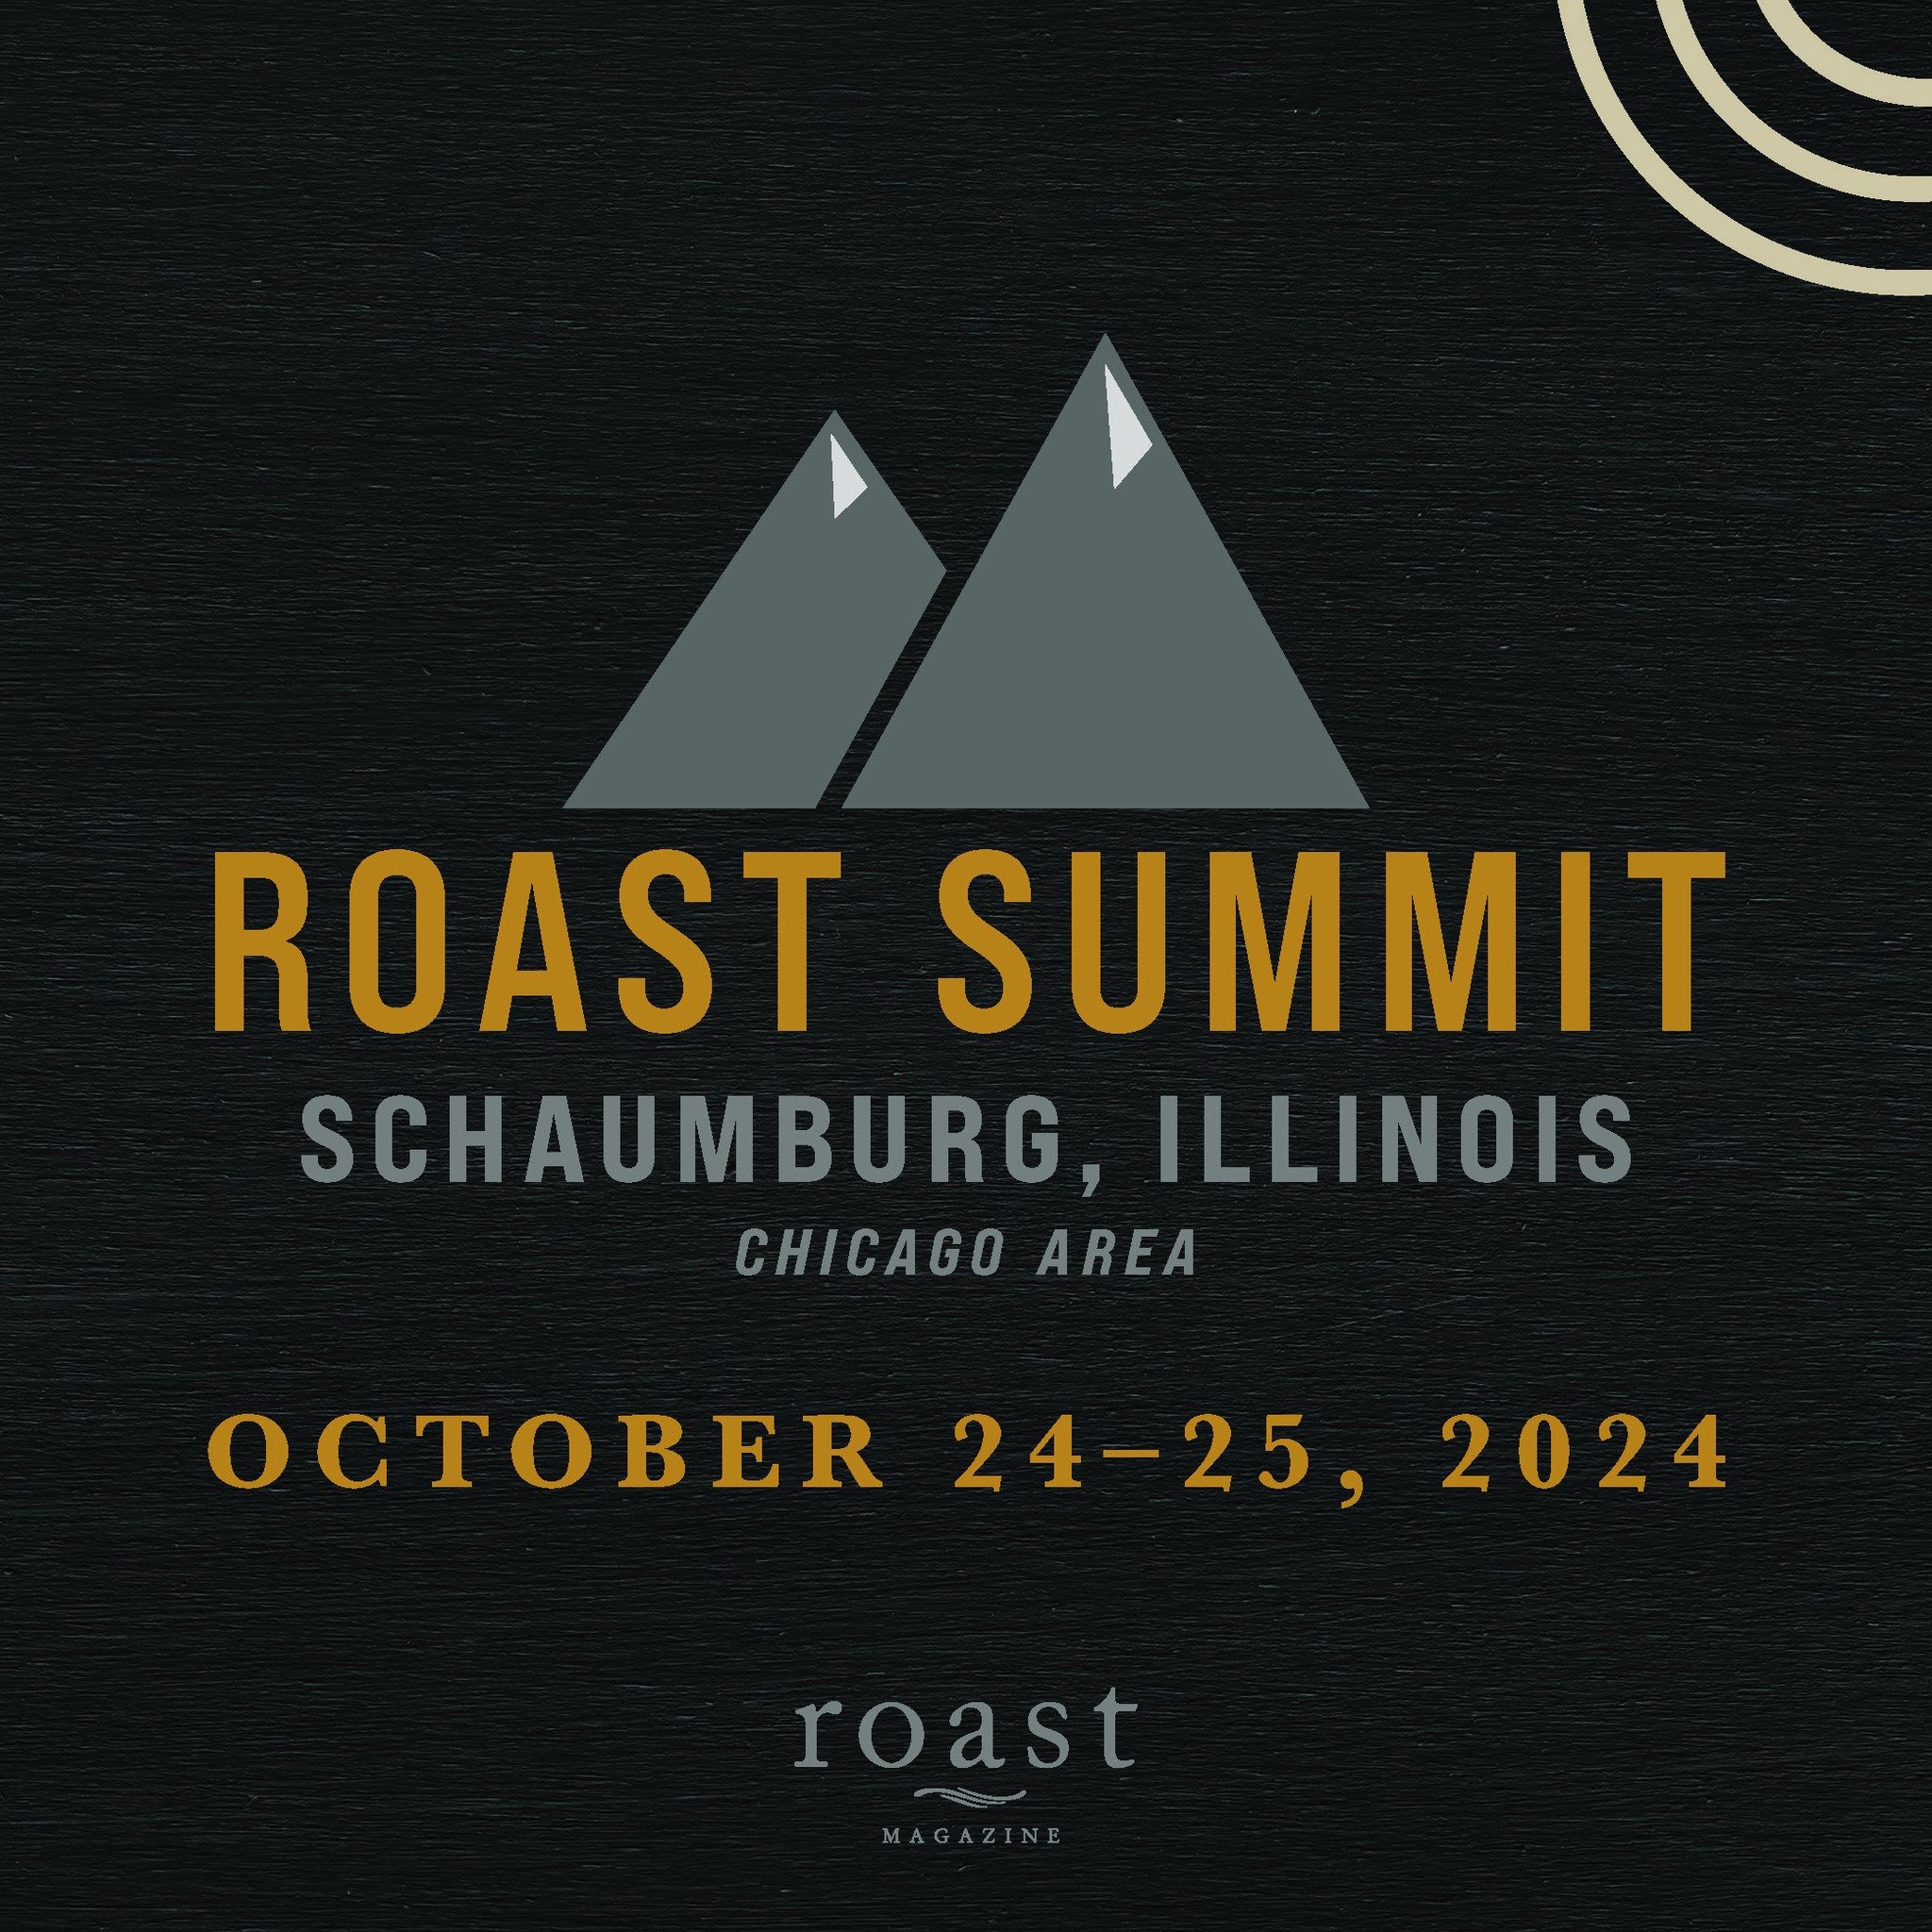 Roast Summit is headed to the Chicago area! The next Roast Summit will be in-person on October 24-25, 2024 in Schaumburg, Illinois. We're excited to bring this event to the midwest with the support of @diedrichroasters and @fdcceducation. Session and